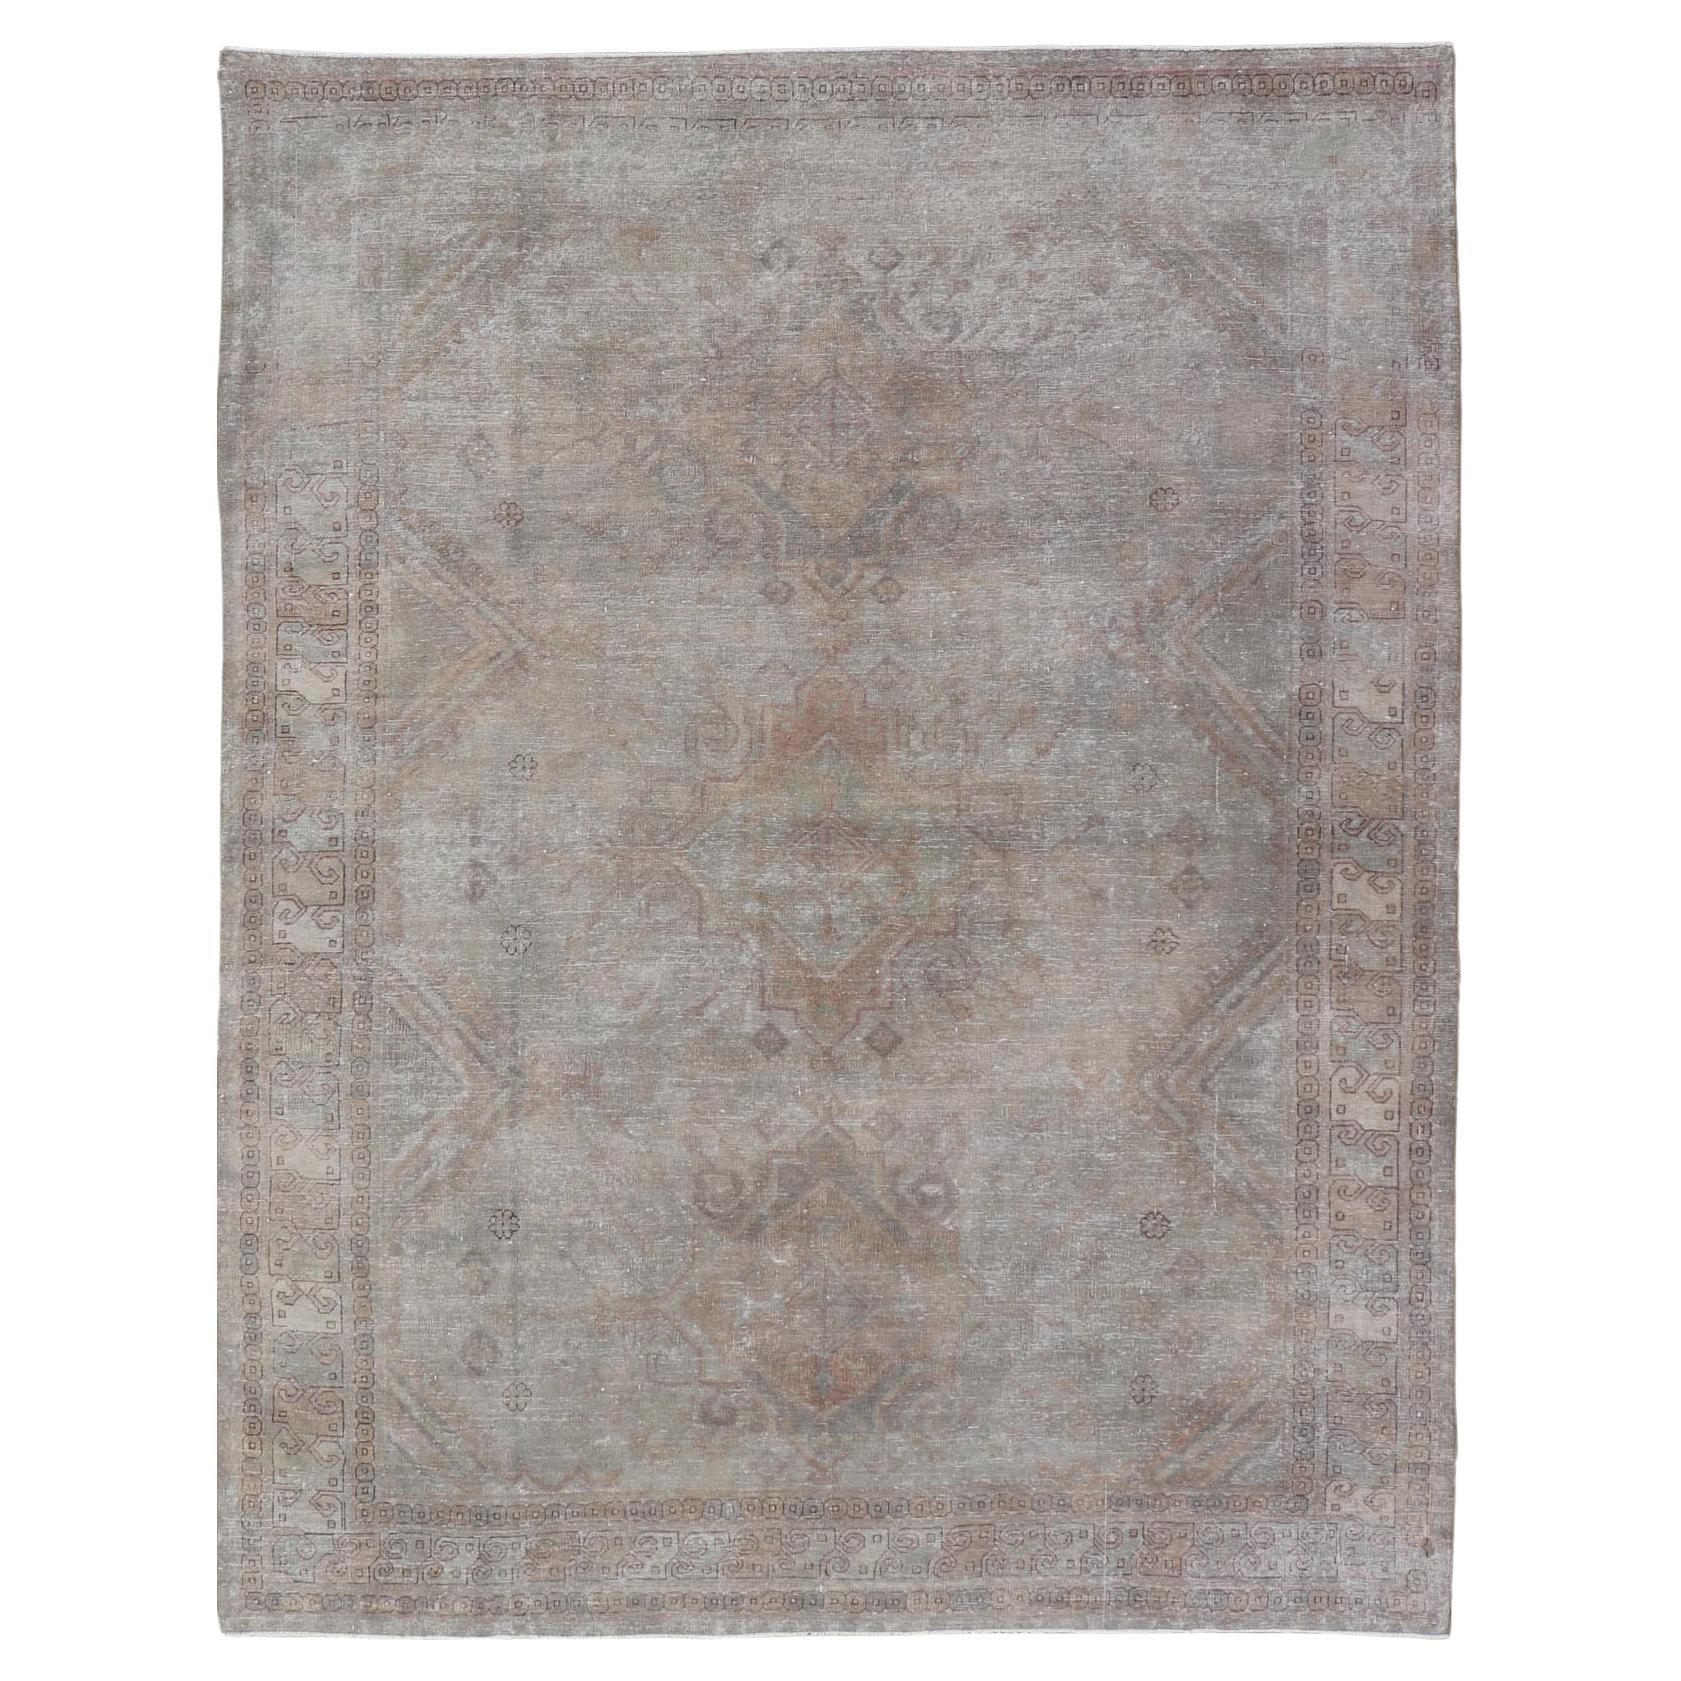 Antique Khotan Rug in Medallions with Silvery Background and Muted Colors 